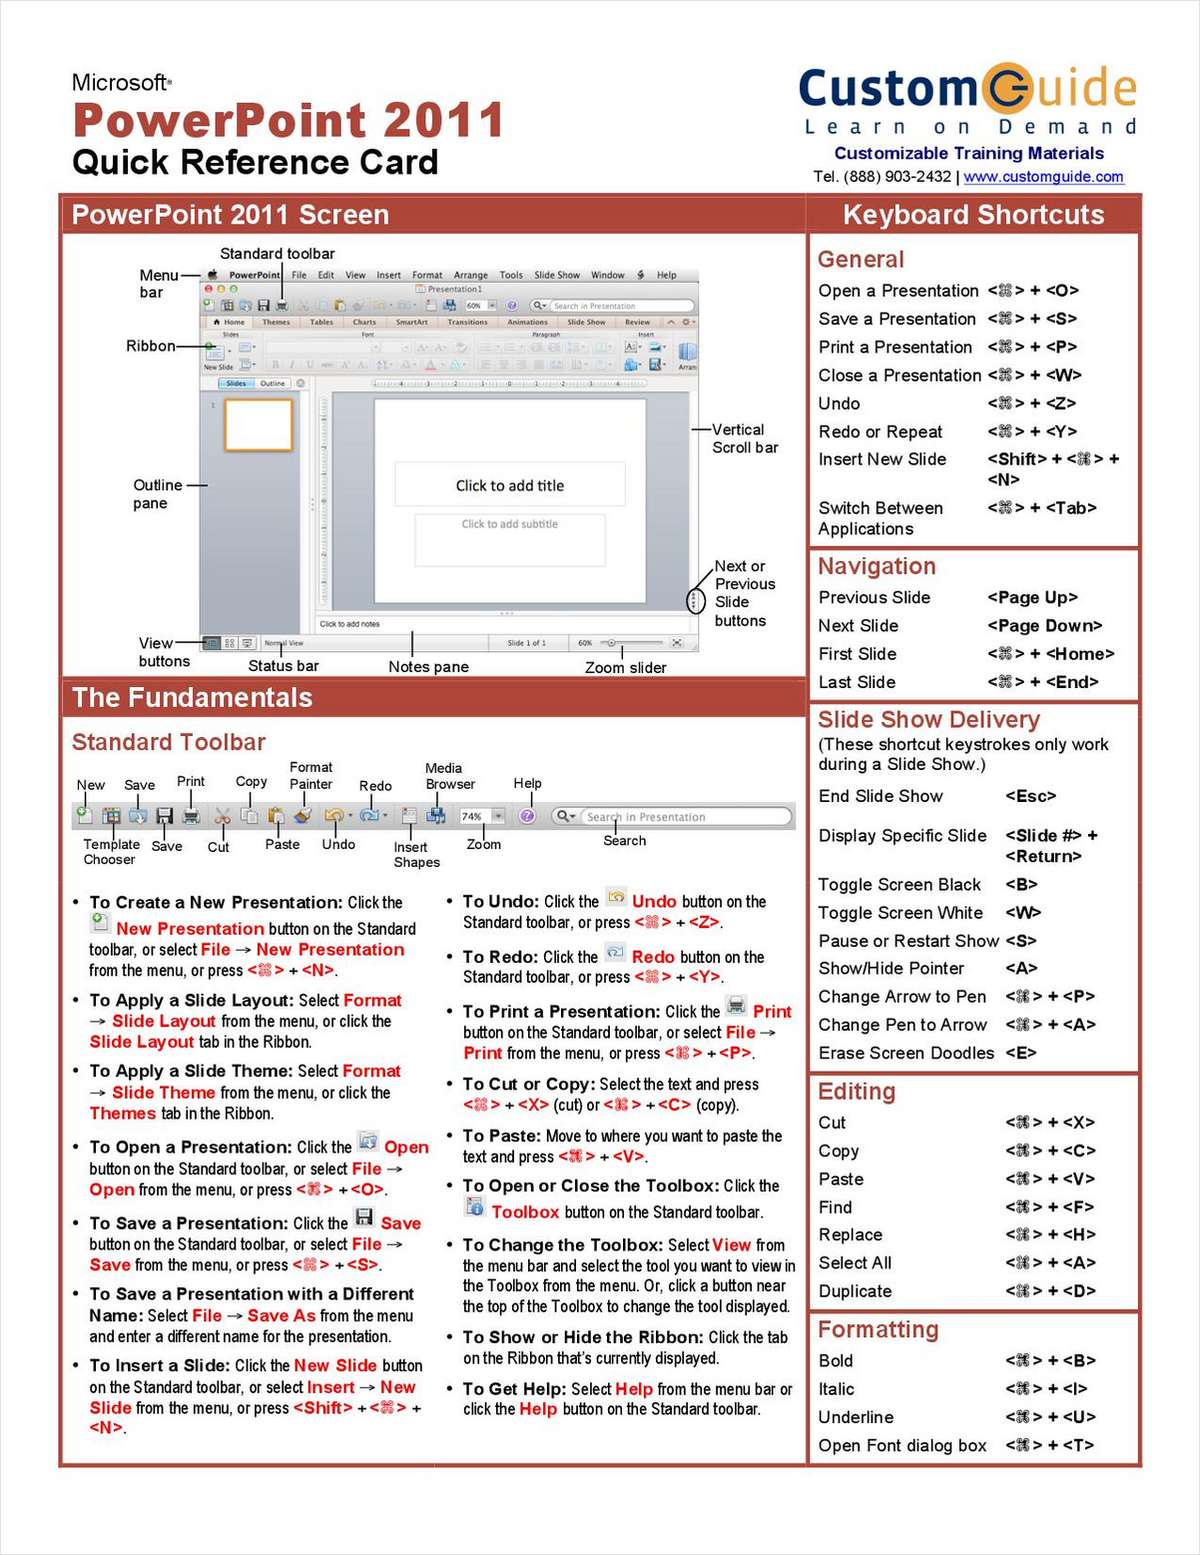 Microsoft PowerPoint 2011- Free Quick Reference Card